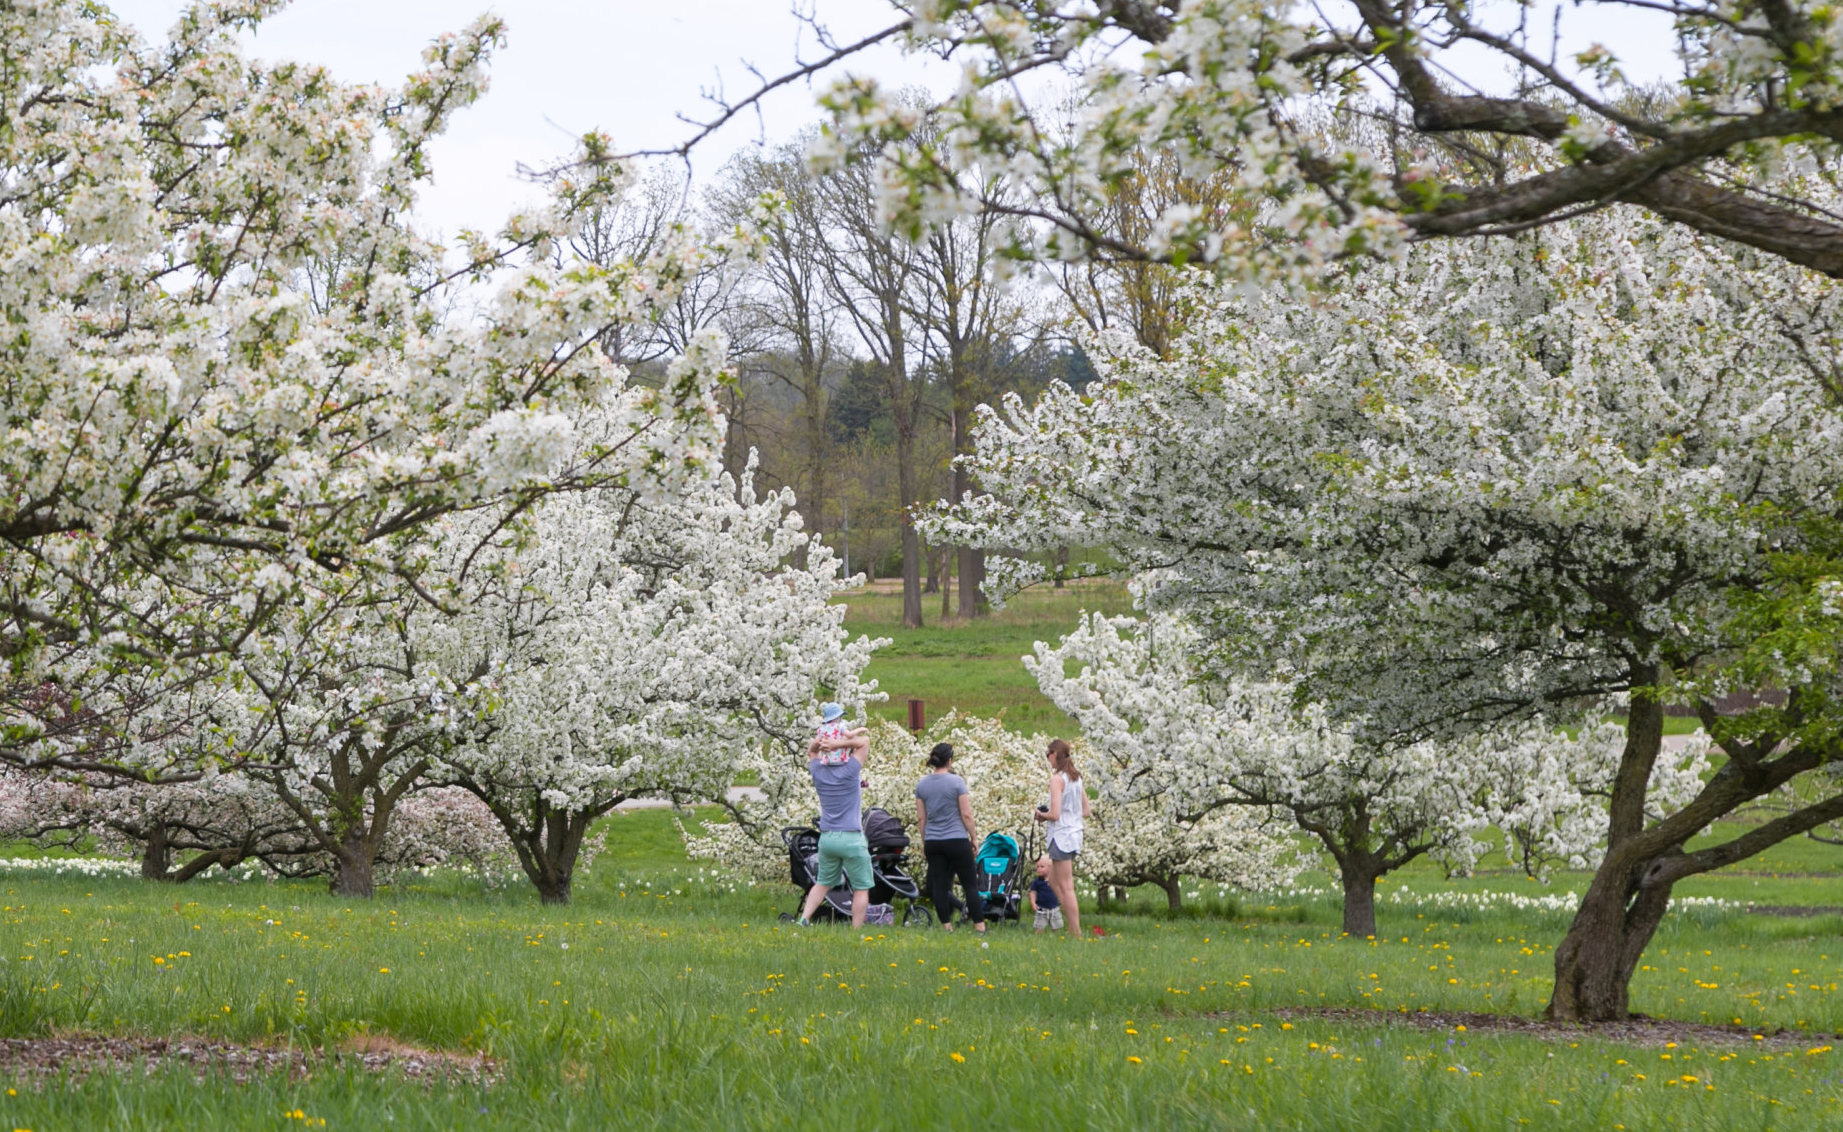 Family with young children take a break to admire blooming crabapples near Crabapple Lake.